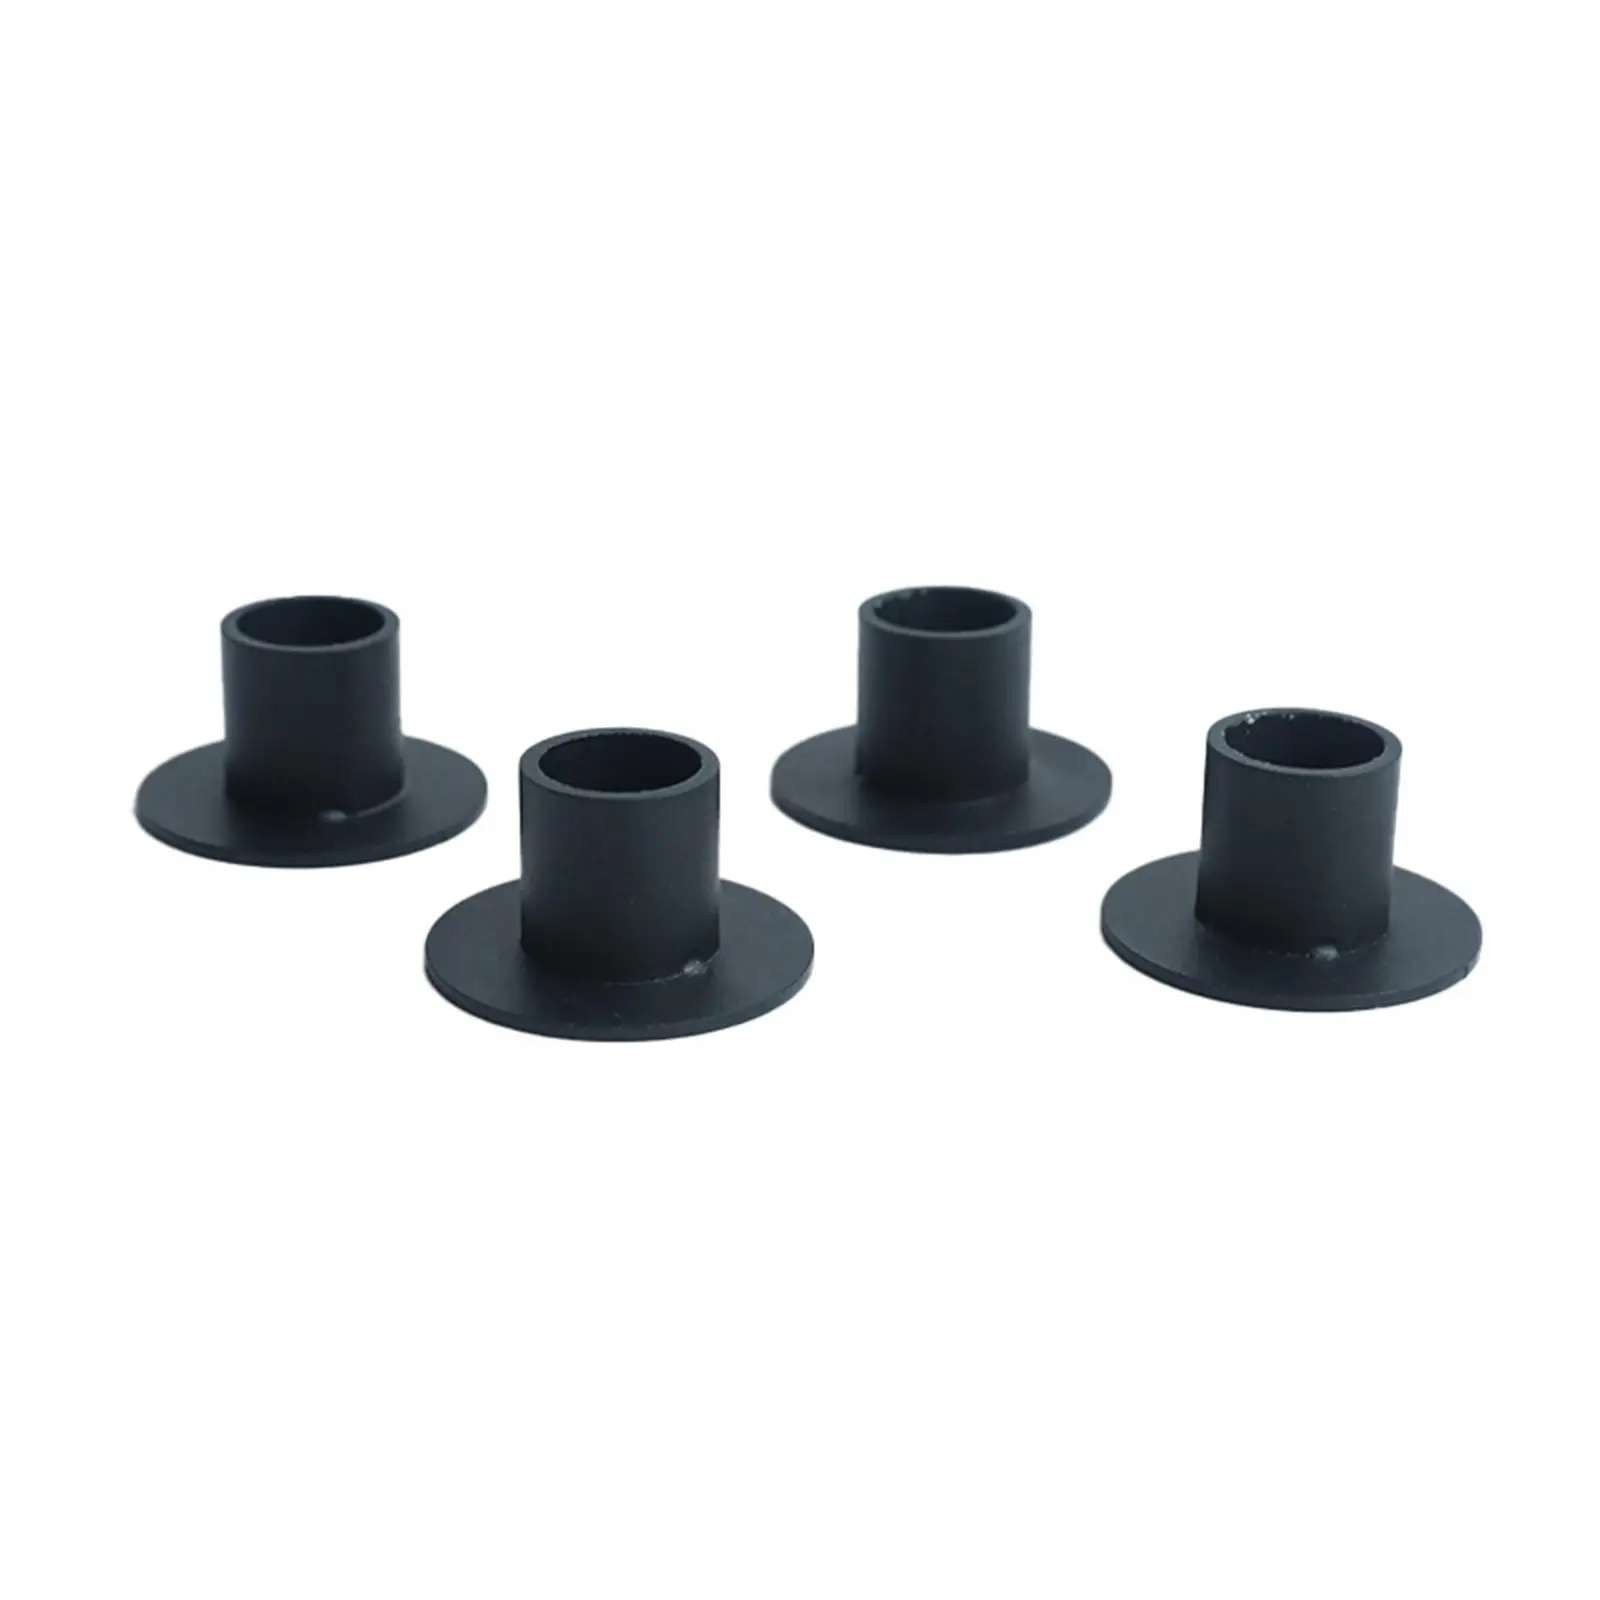 4Pcs Candlestick Holders Stand for Pillar Candles Candleholder Candle Holder